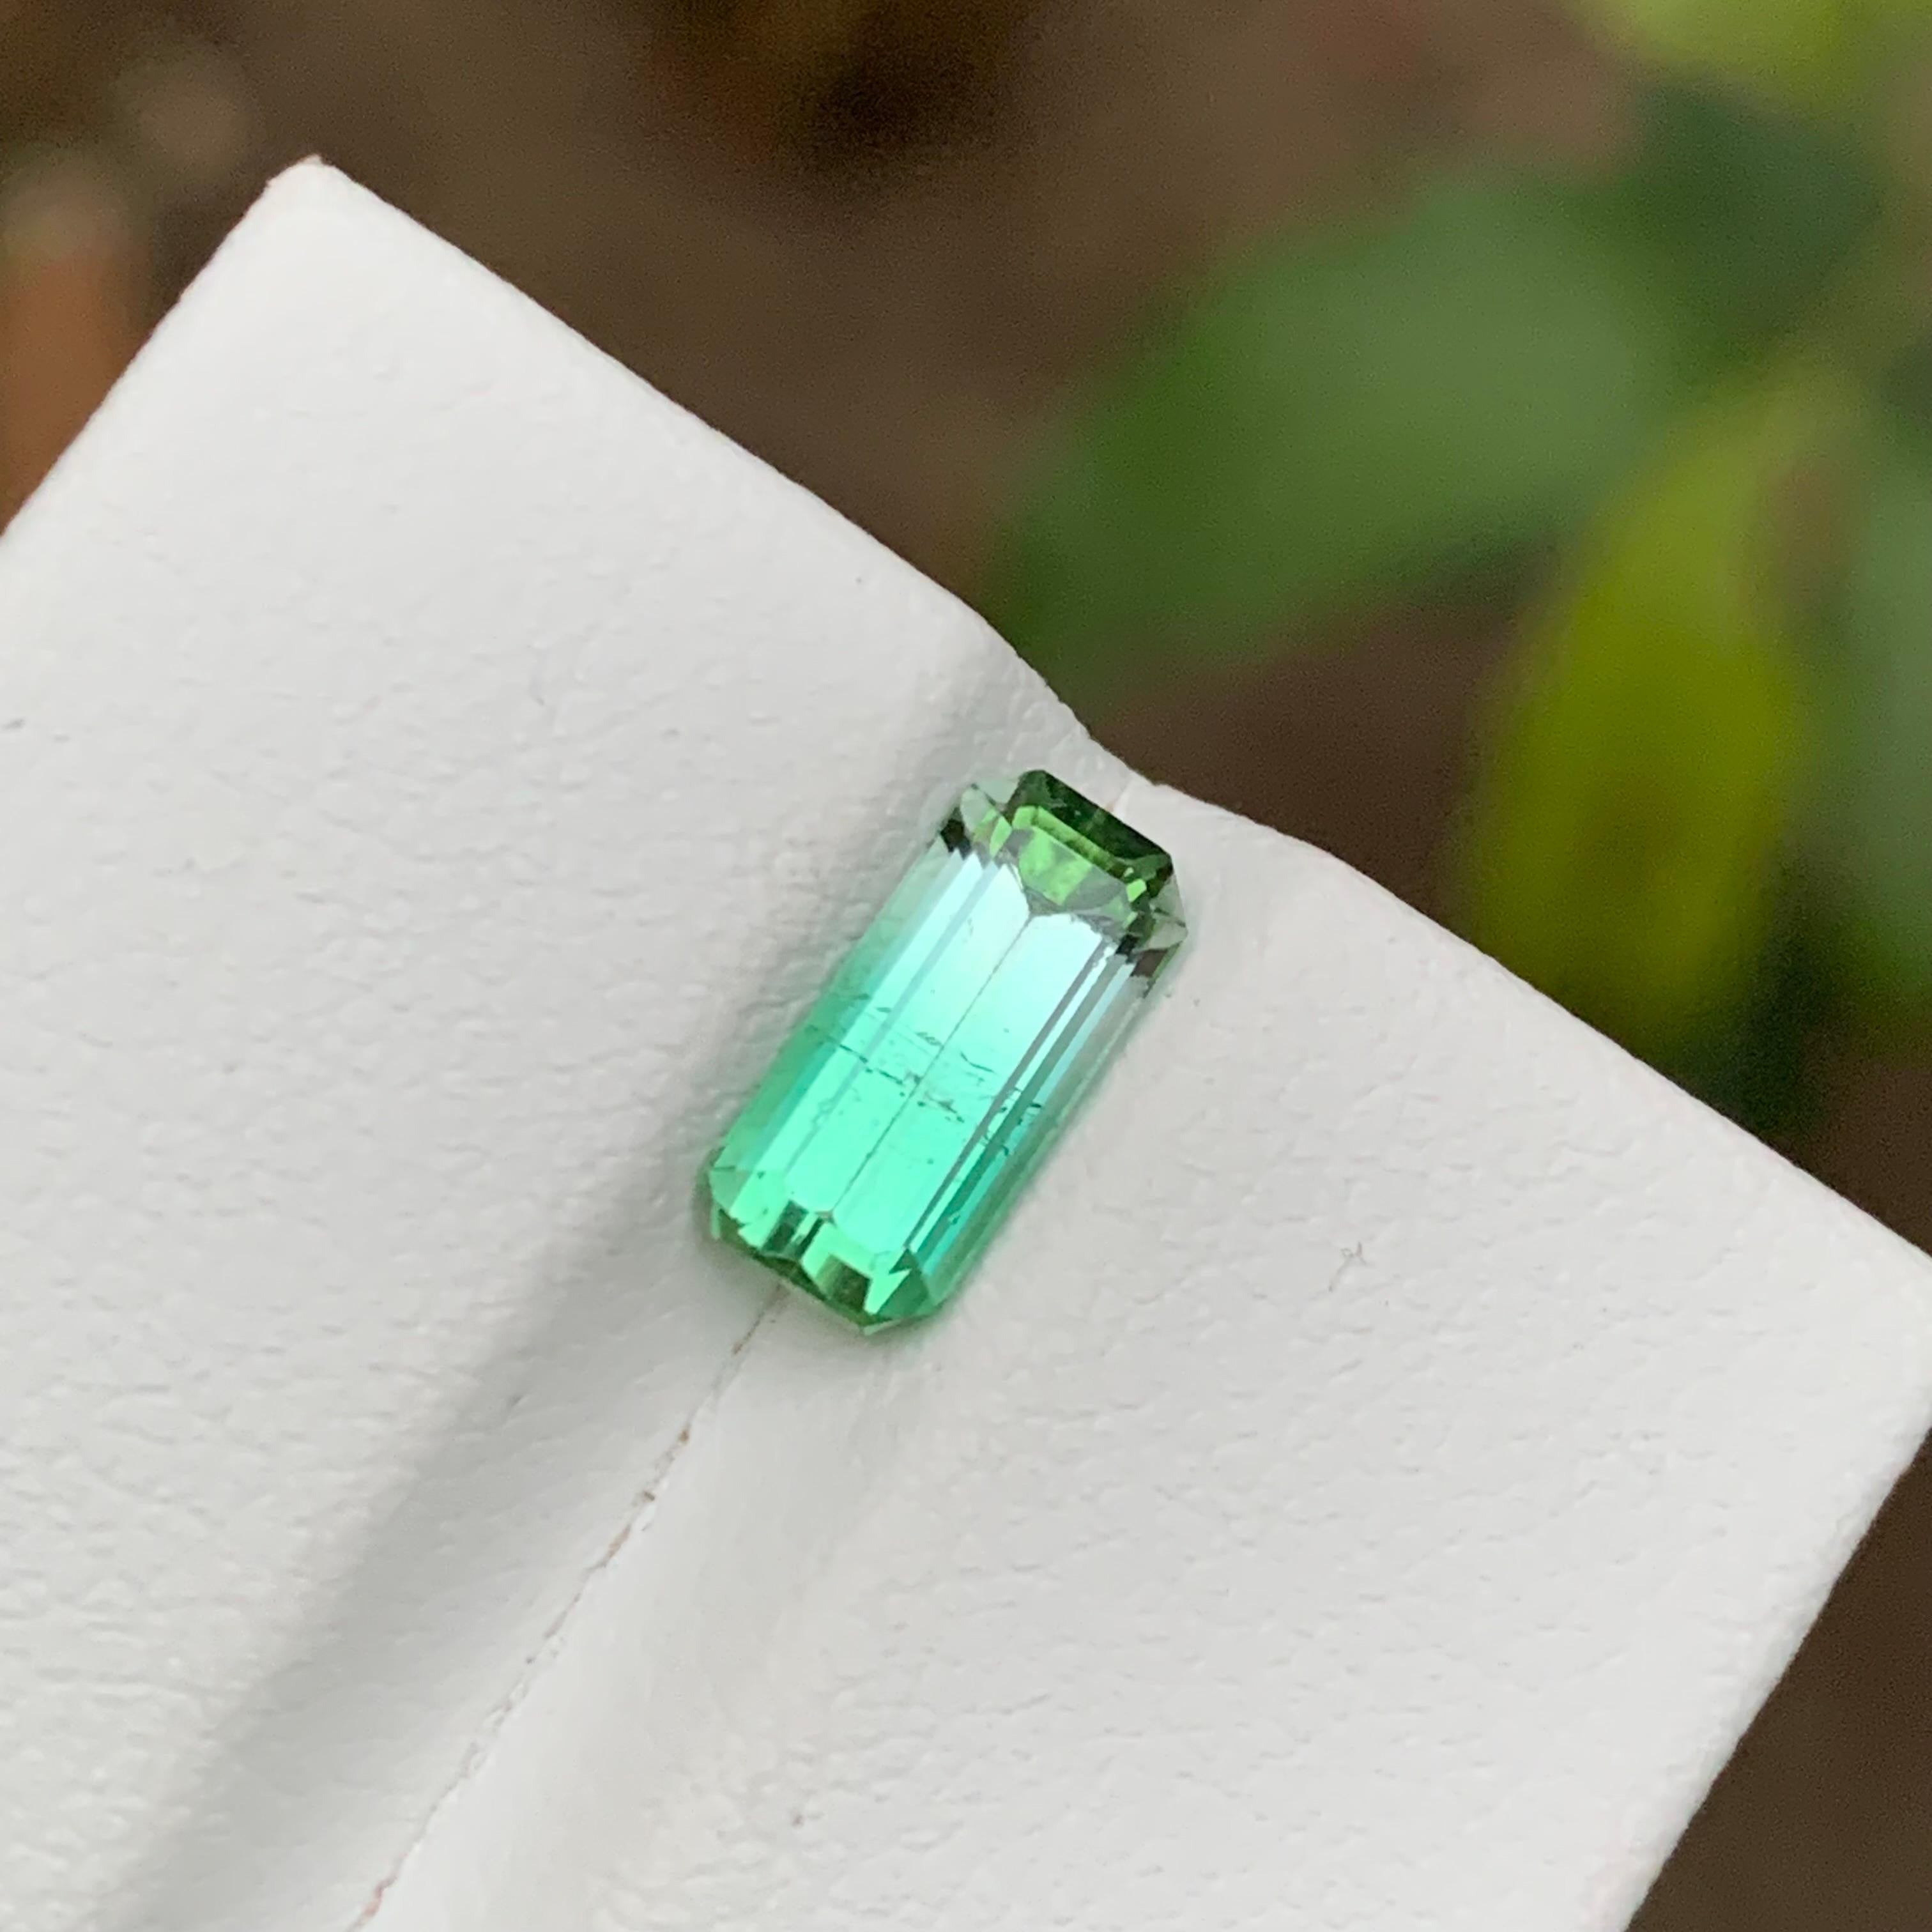 GEMSTONE TYPE: Tourmaline
PIECE(S): 1
WEIGHT: 1.70 Carats
SHAPE: Emerald
SIZE (MM): 9.98 x 4.68 x 4.11
COLOR: Neon Bluish Green
CLARITY: Slightly Included 
TREATMENT: None
ORIGIN: Afghanistan
CERTIFICATE: On demand

Indulge in the allure of natural